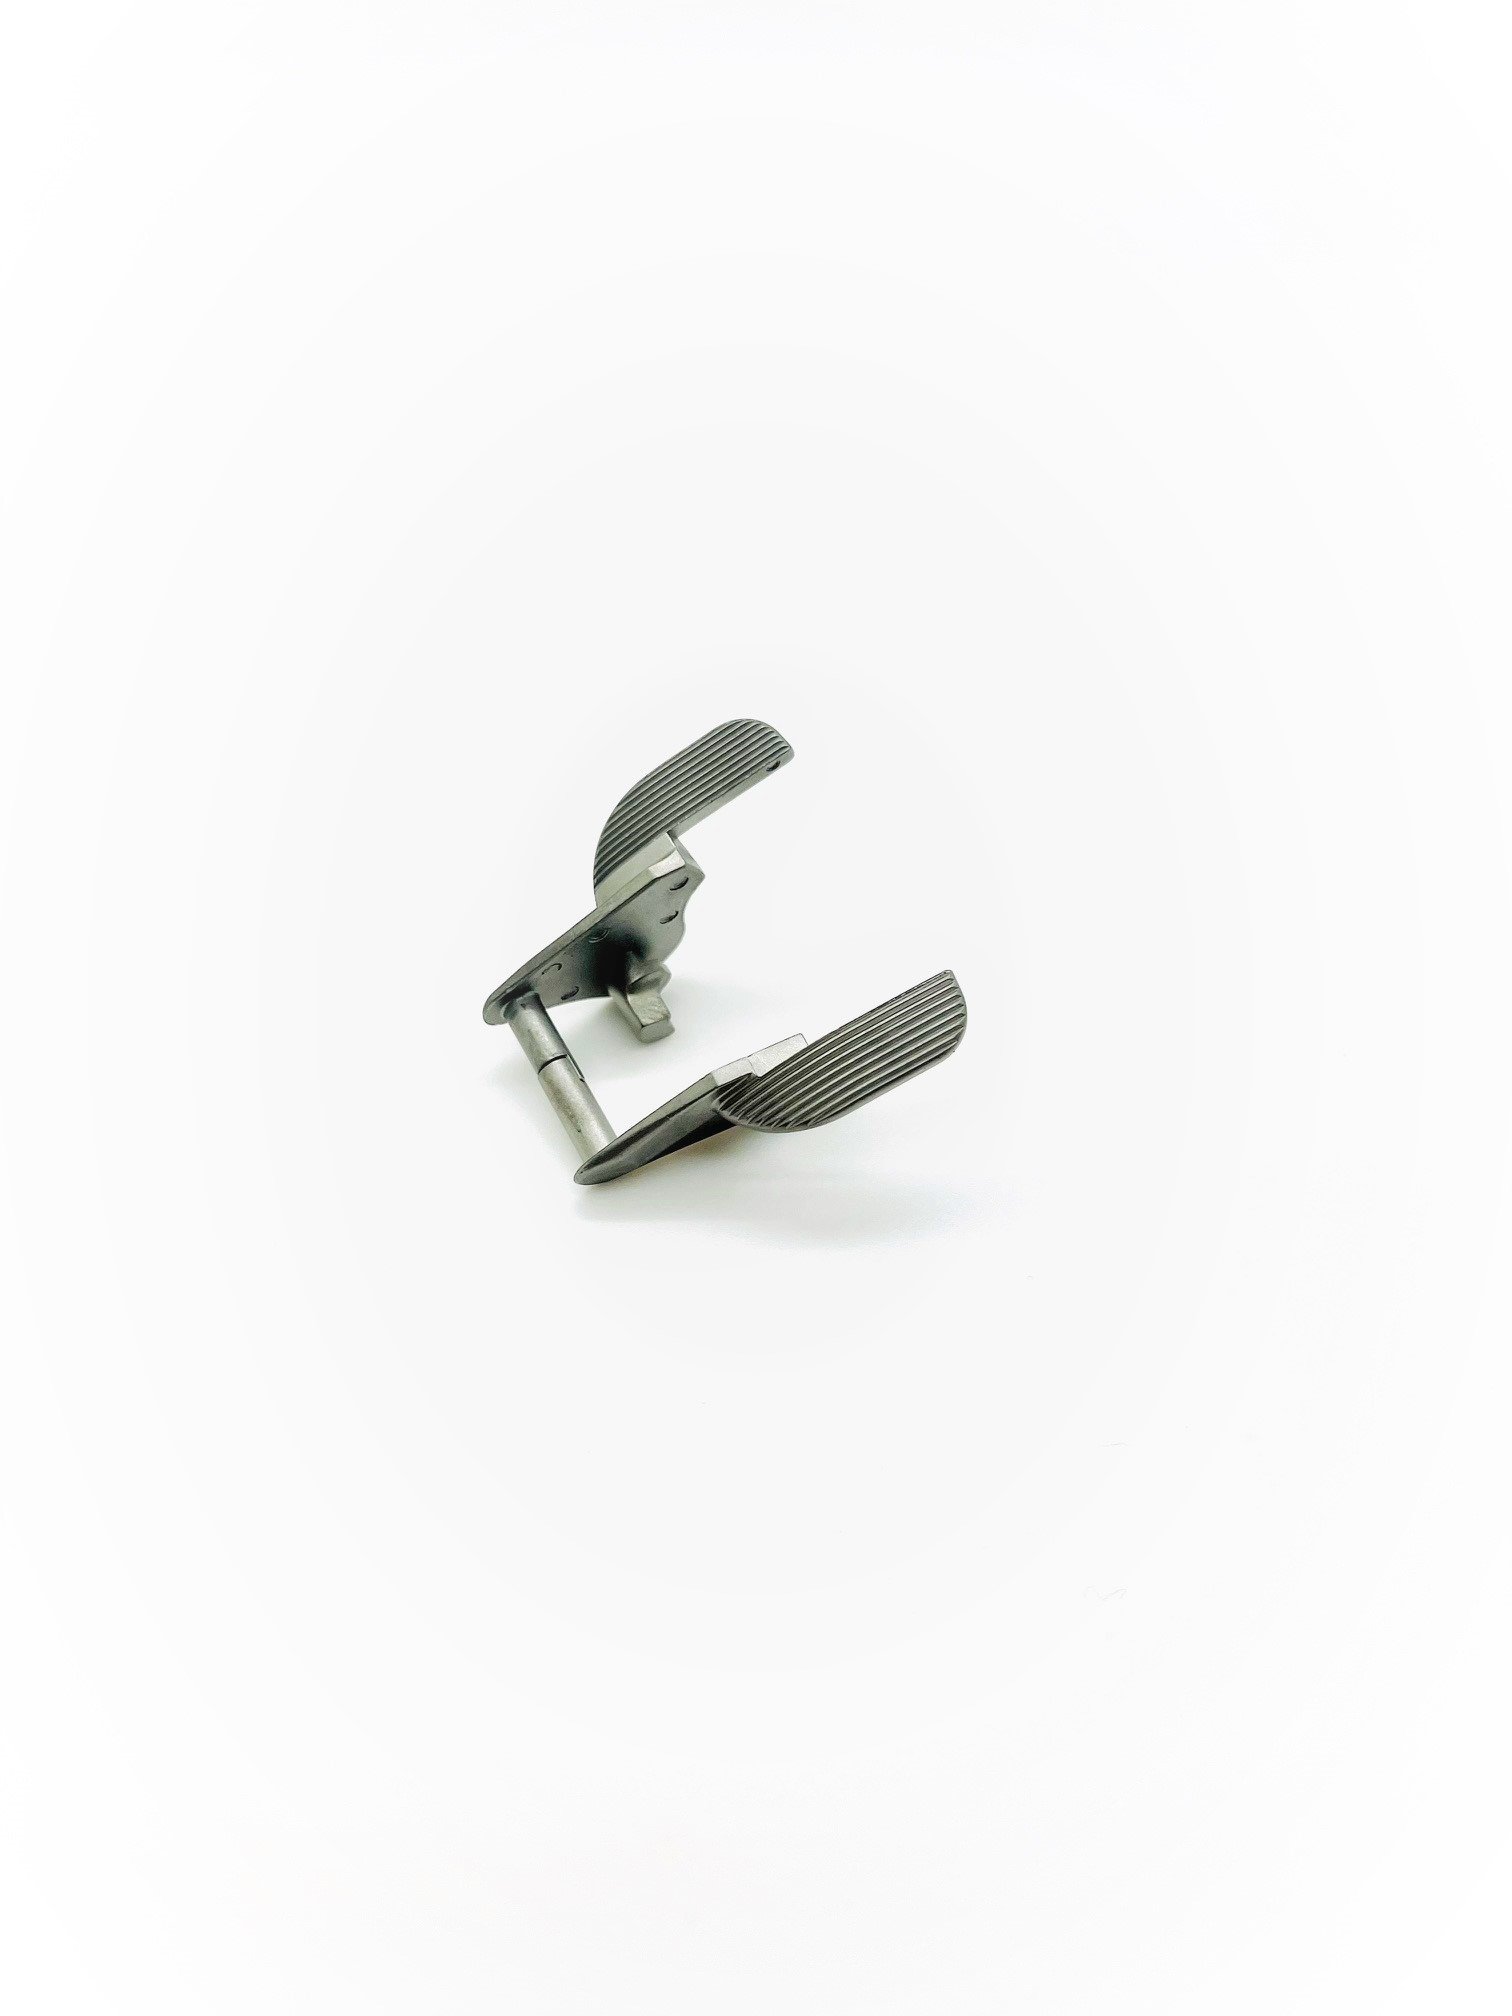 Ambi thumb safety Stainless steel